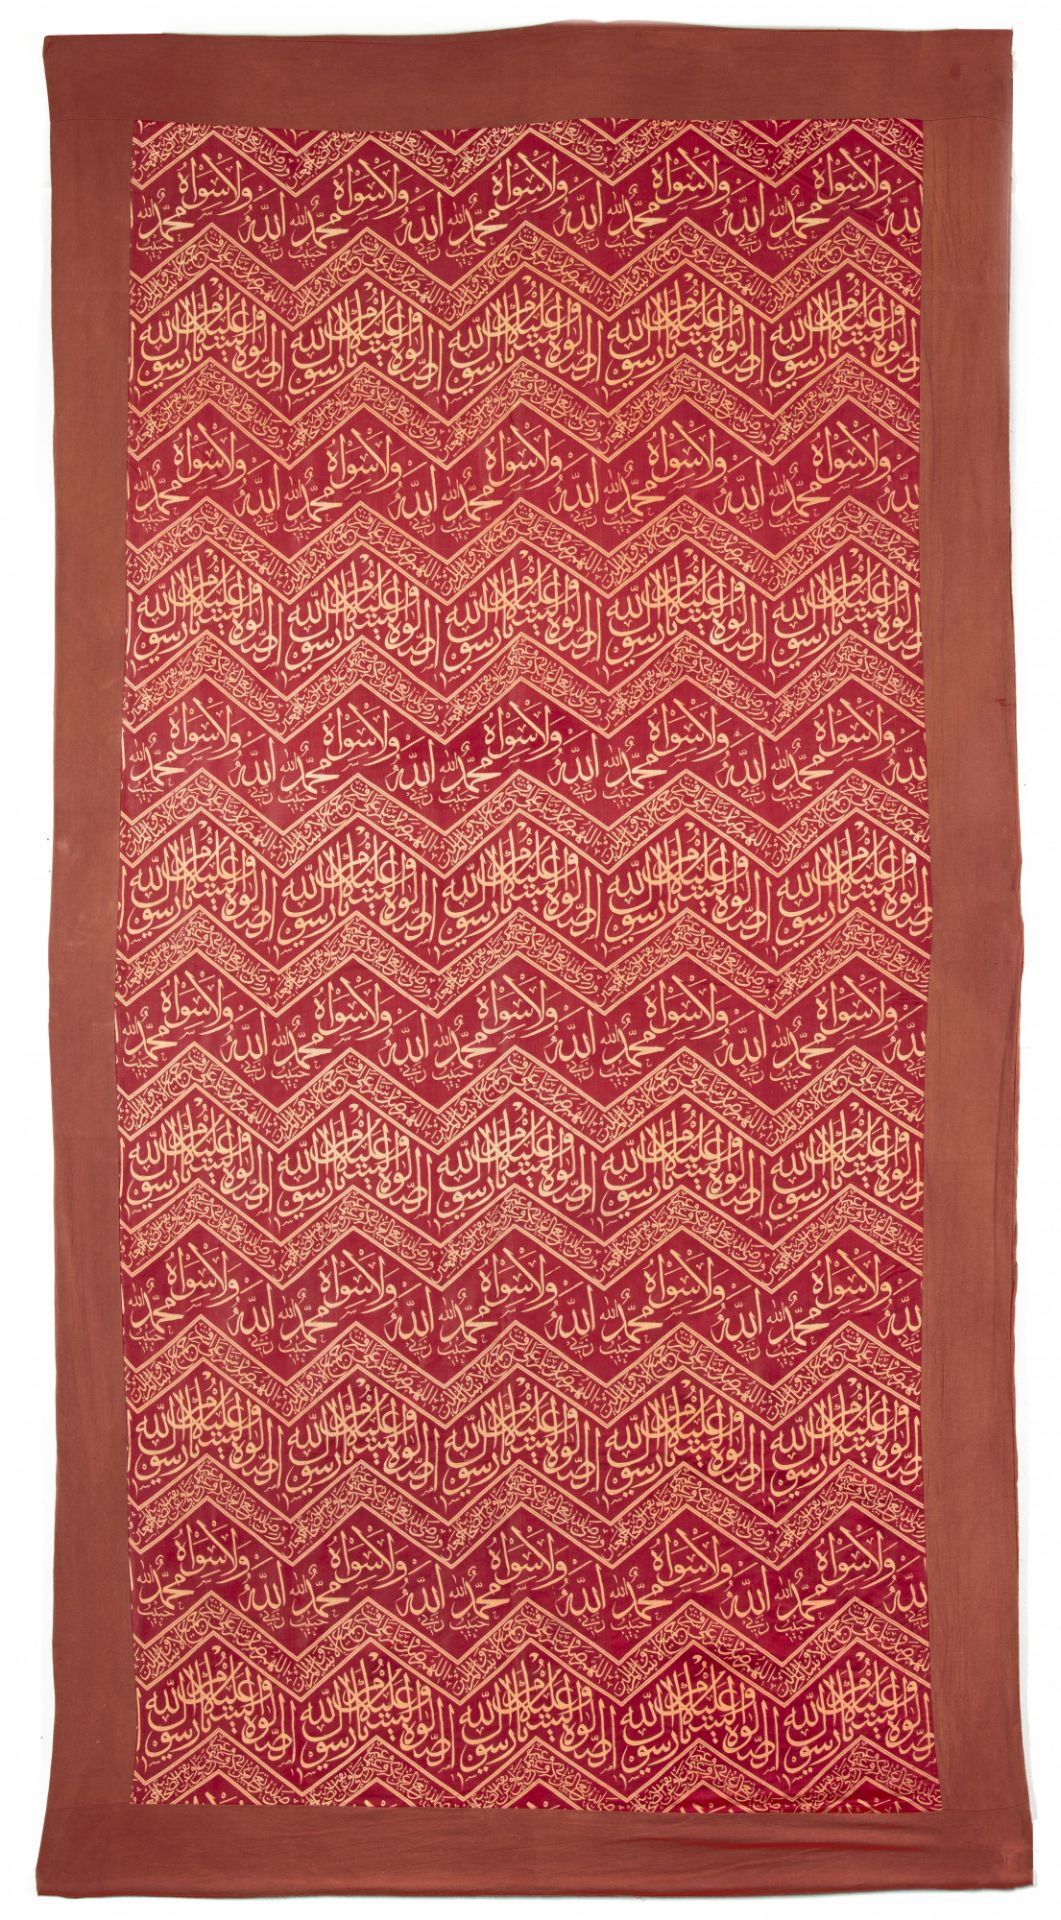 AN OTTOMAN WOVEN SILK LAMPAS-WEAVE TOMB COVER FRAGMENT TURKEY, LATE 19TH- EARLY 20TH CENTURY